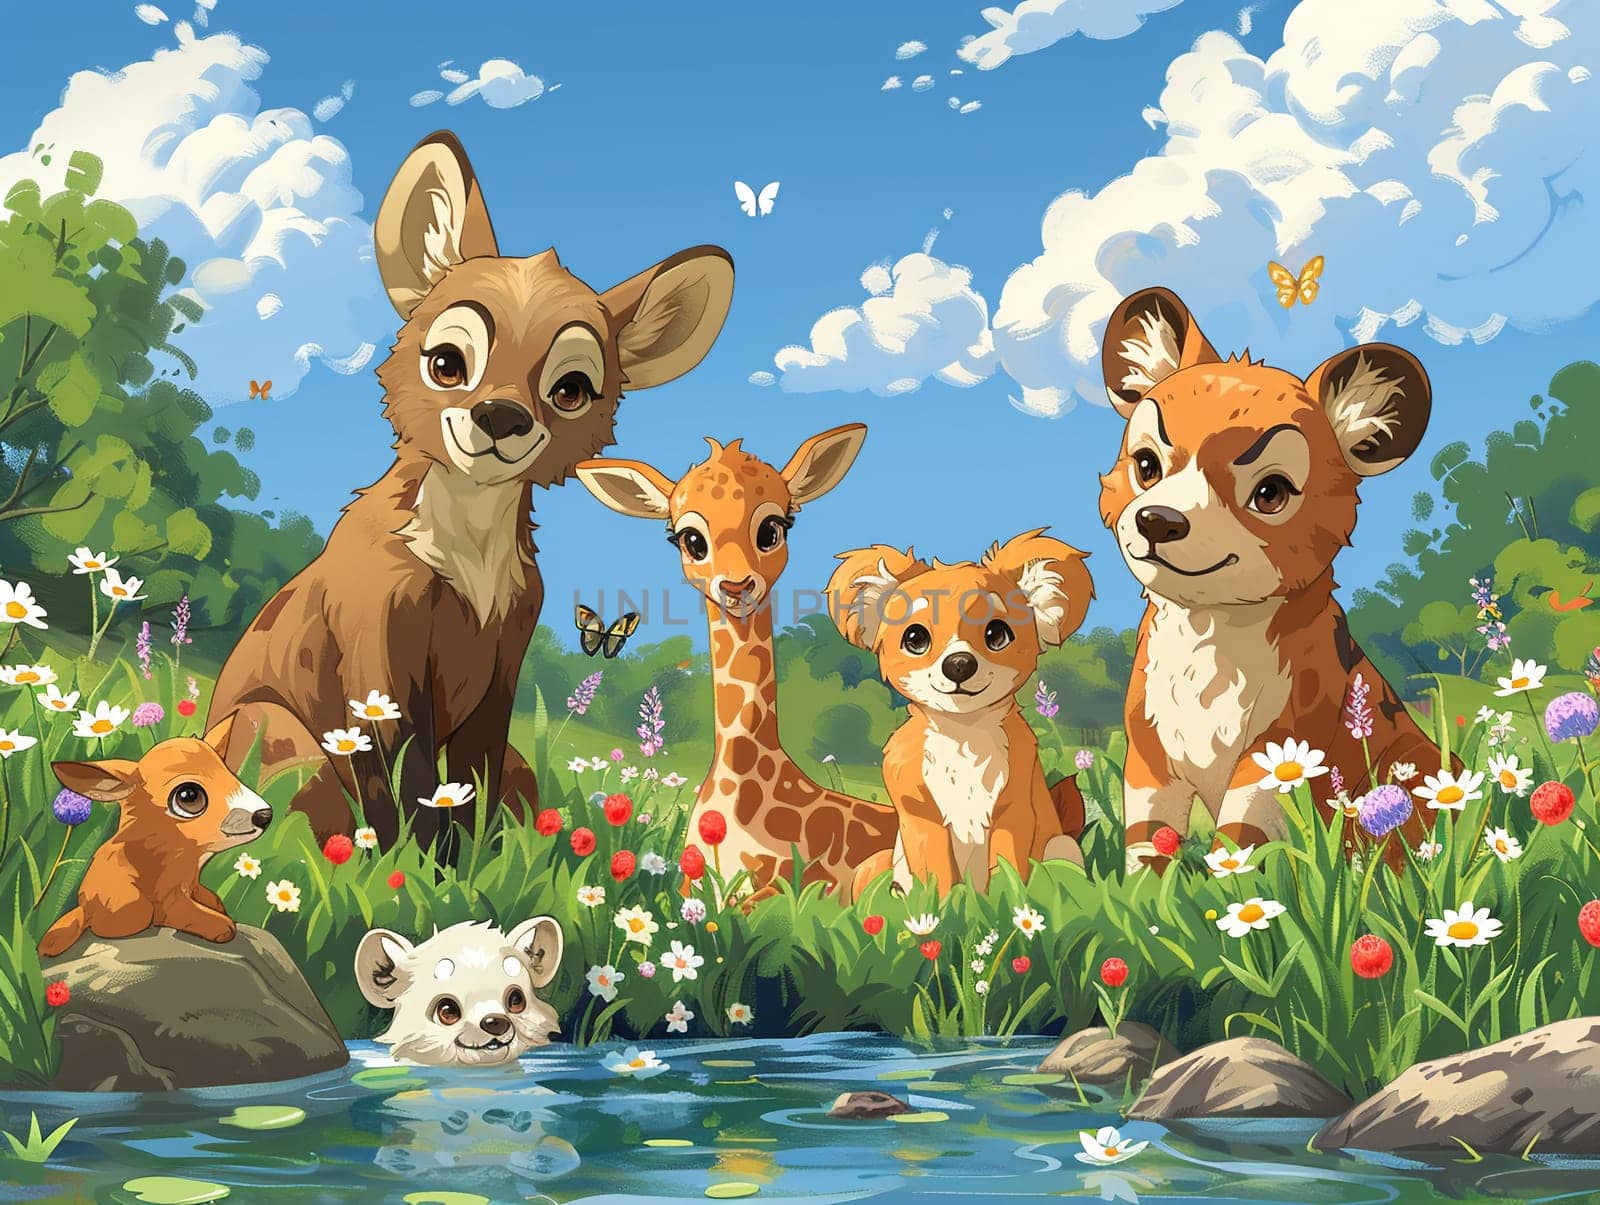 Animal conservation awareness poster, cartoon style designed to educate and inspire care for wildlife.